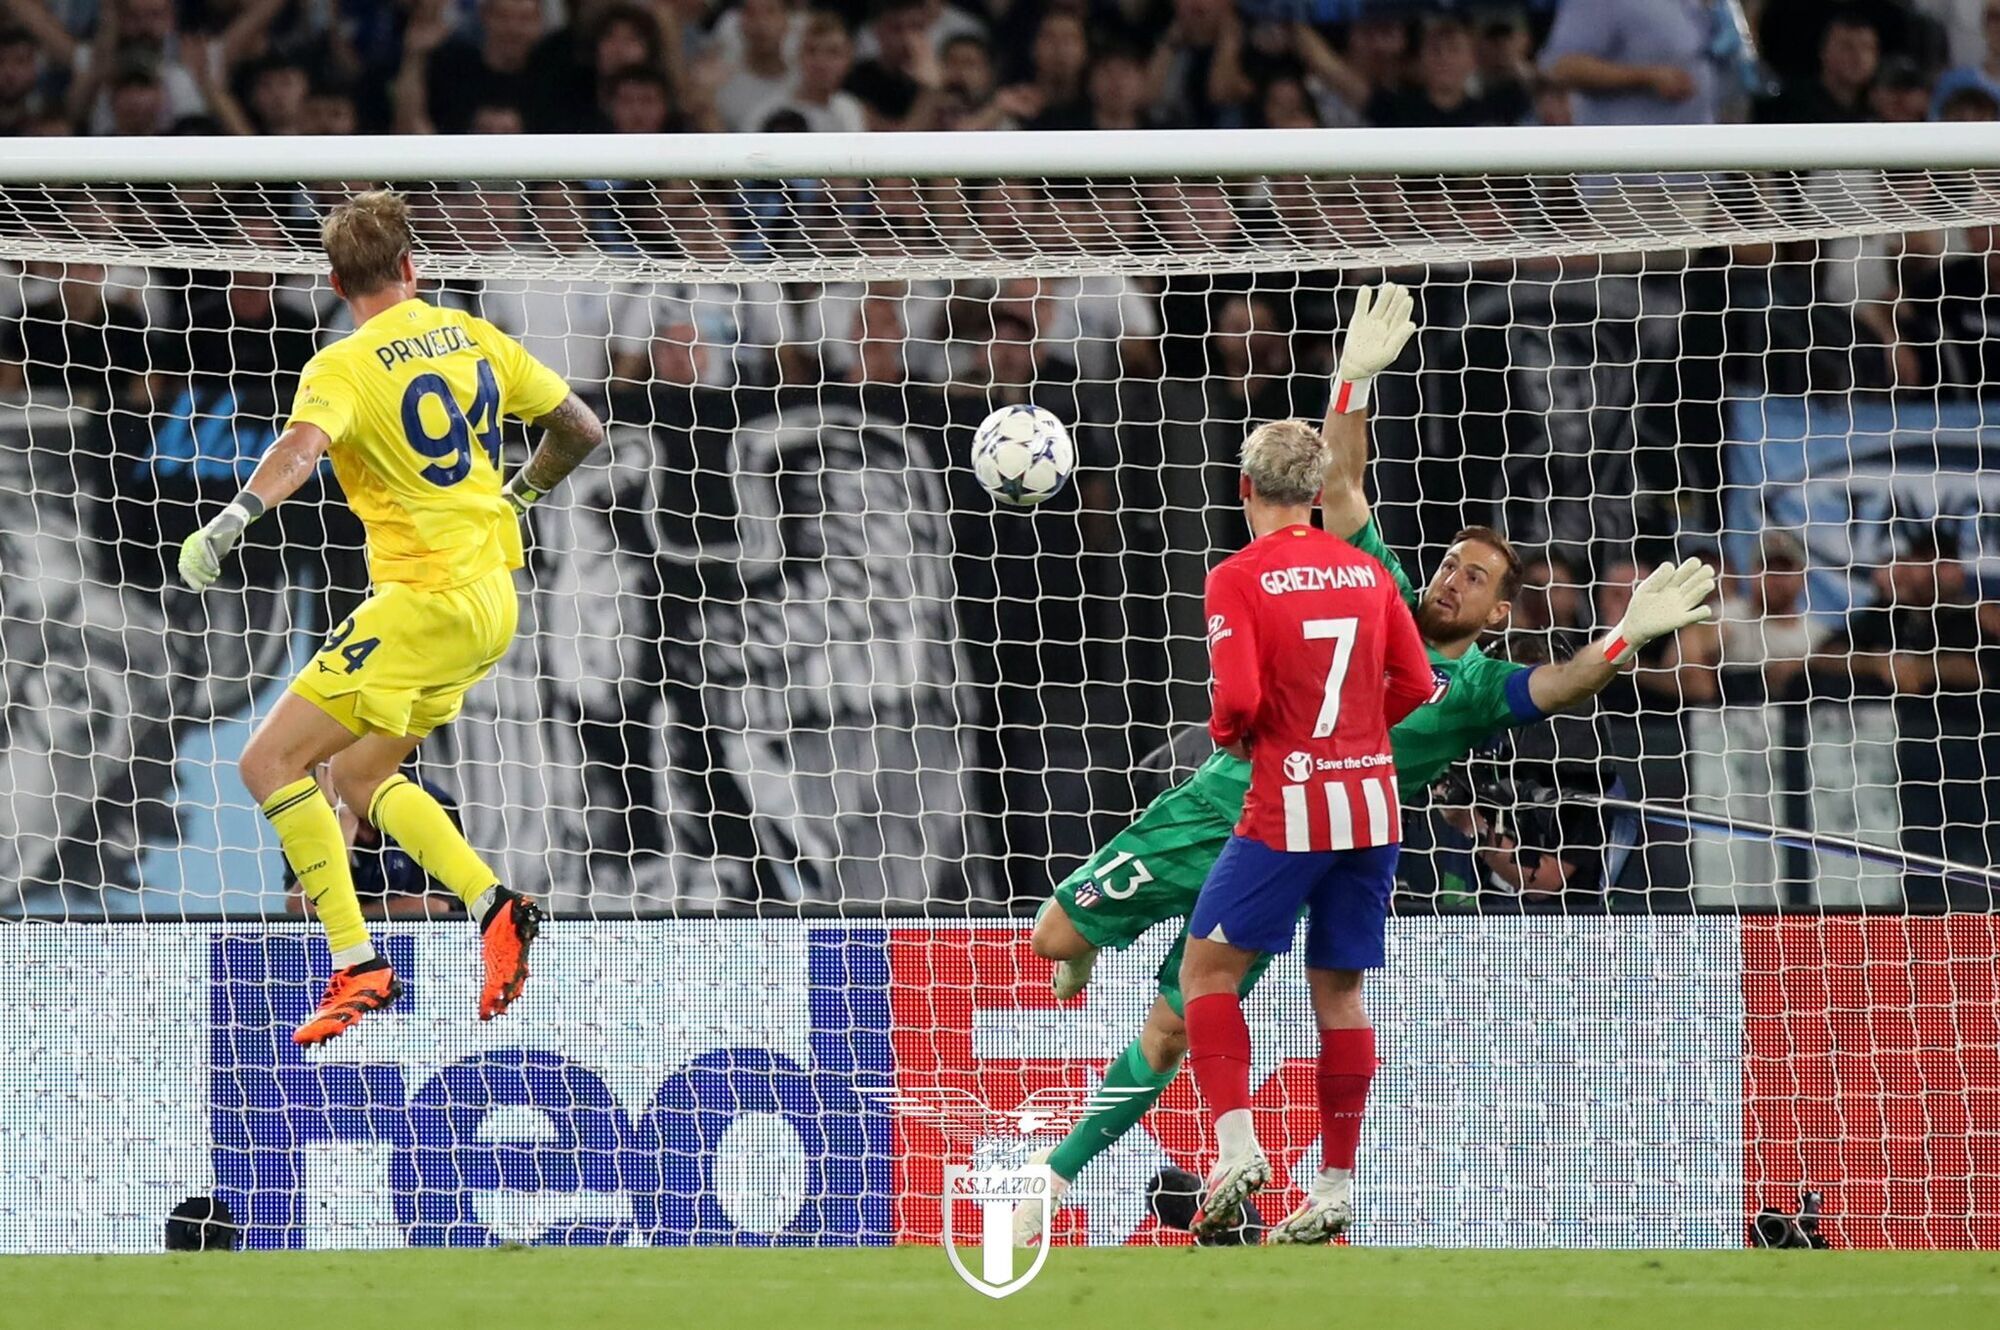 Score by a goalkeeper: a fantastic denouement in the Champions League match. Video